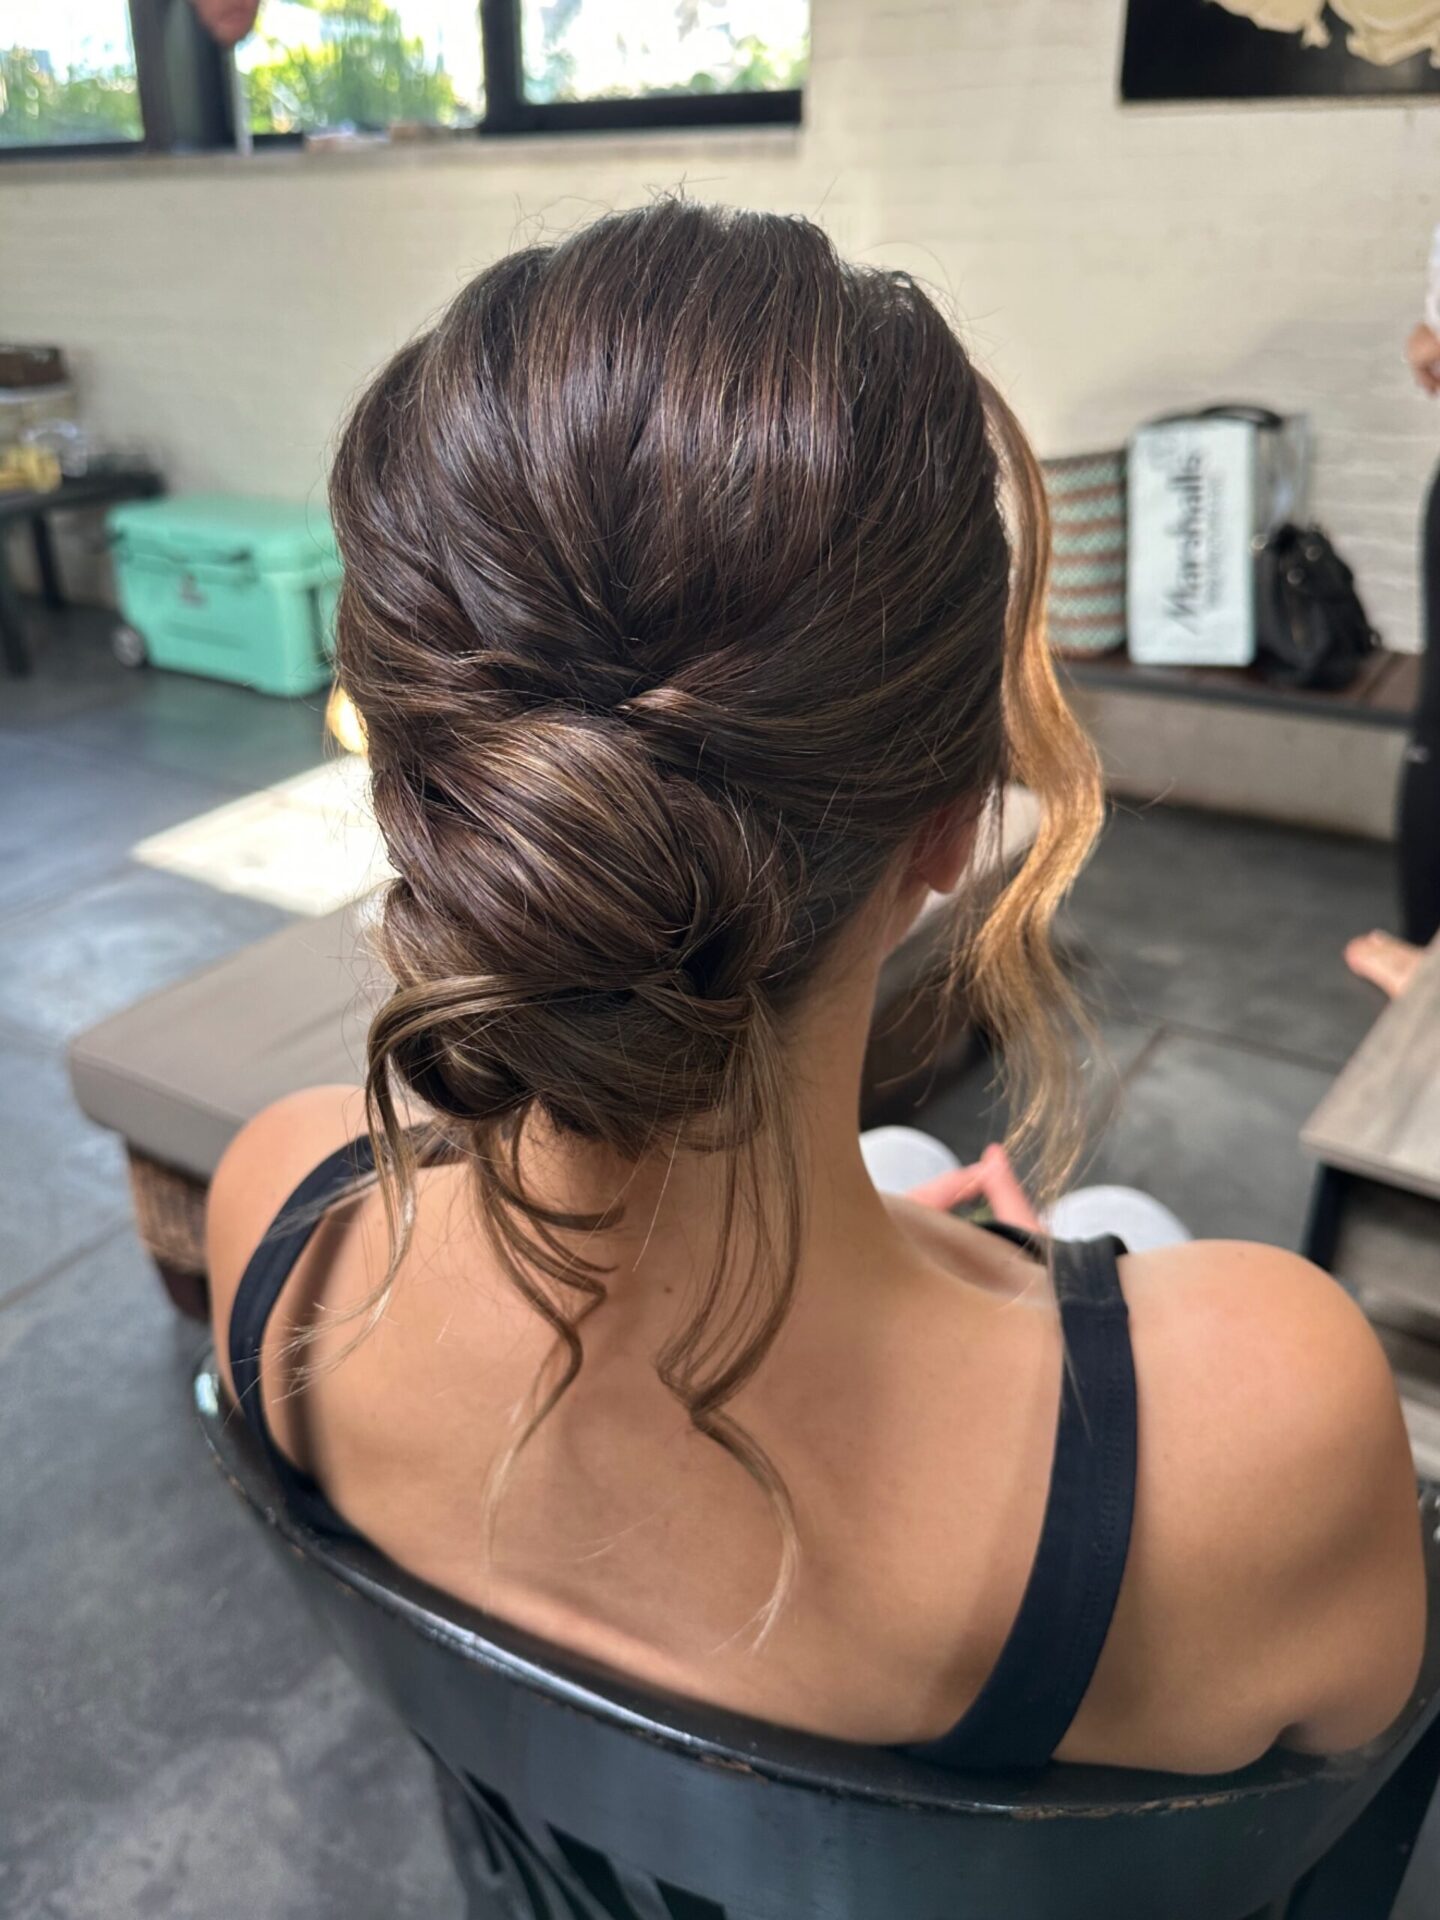 MAKEUP ARTIST AND HAIR STYLIST NYC | Wedding Hair Styles